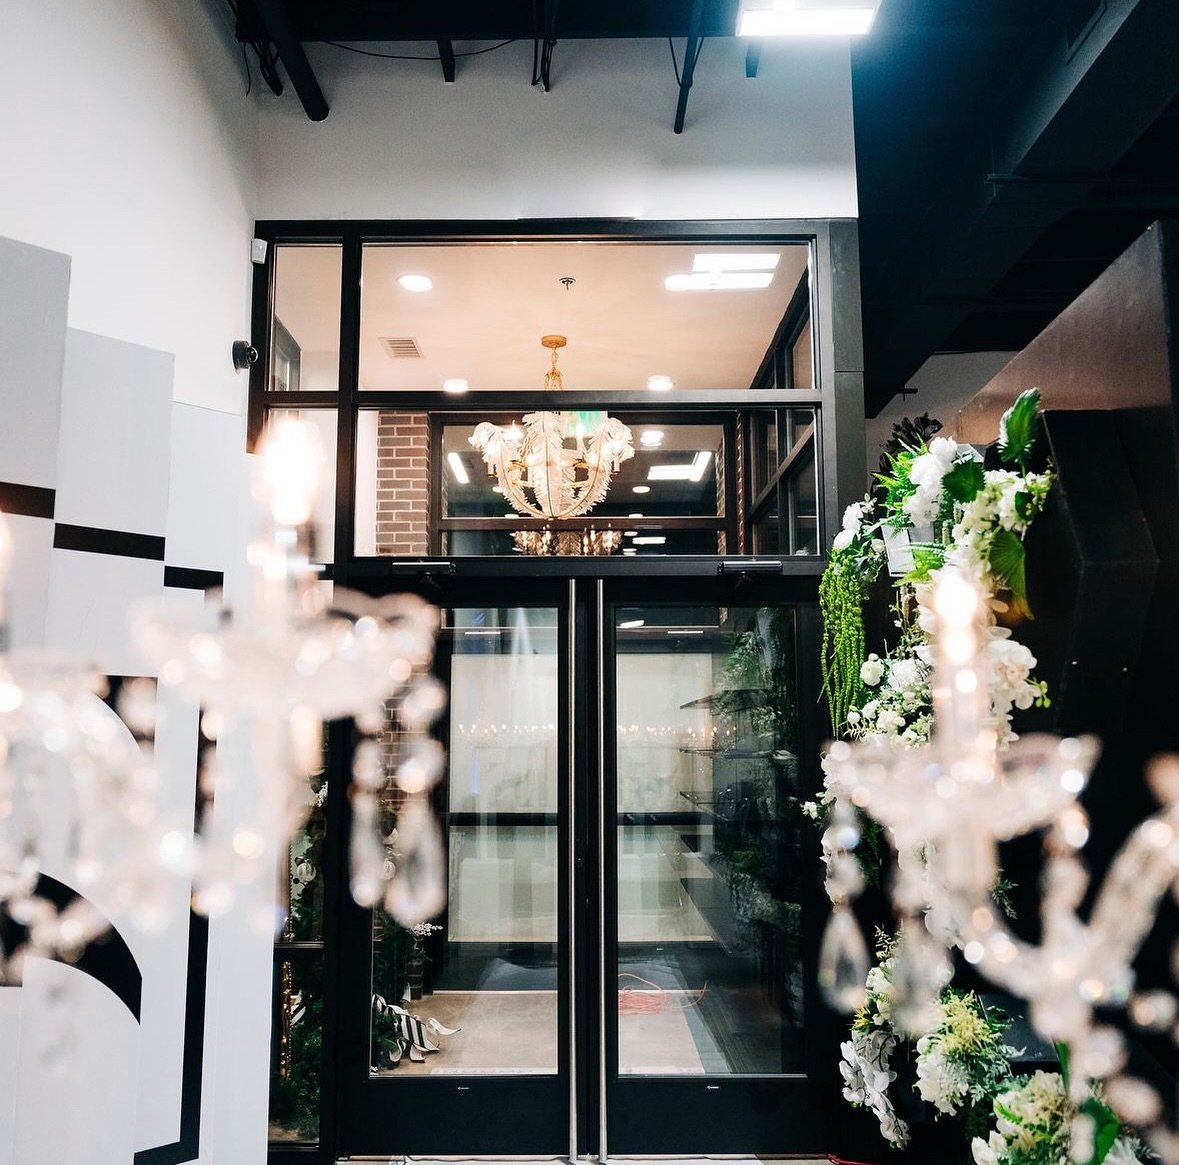 The entrance to memories you won&rsquo;t soon forget! Create your moment at Slate The Venue for your next celebration. Learn more about all of our amenities, packages, and more at www.slatethevenue.com today! ✨